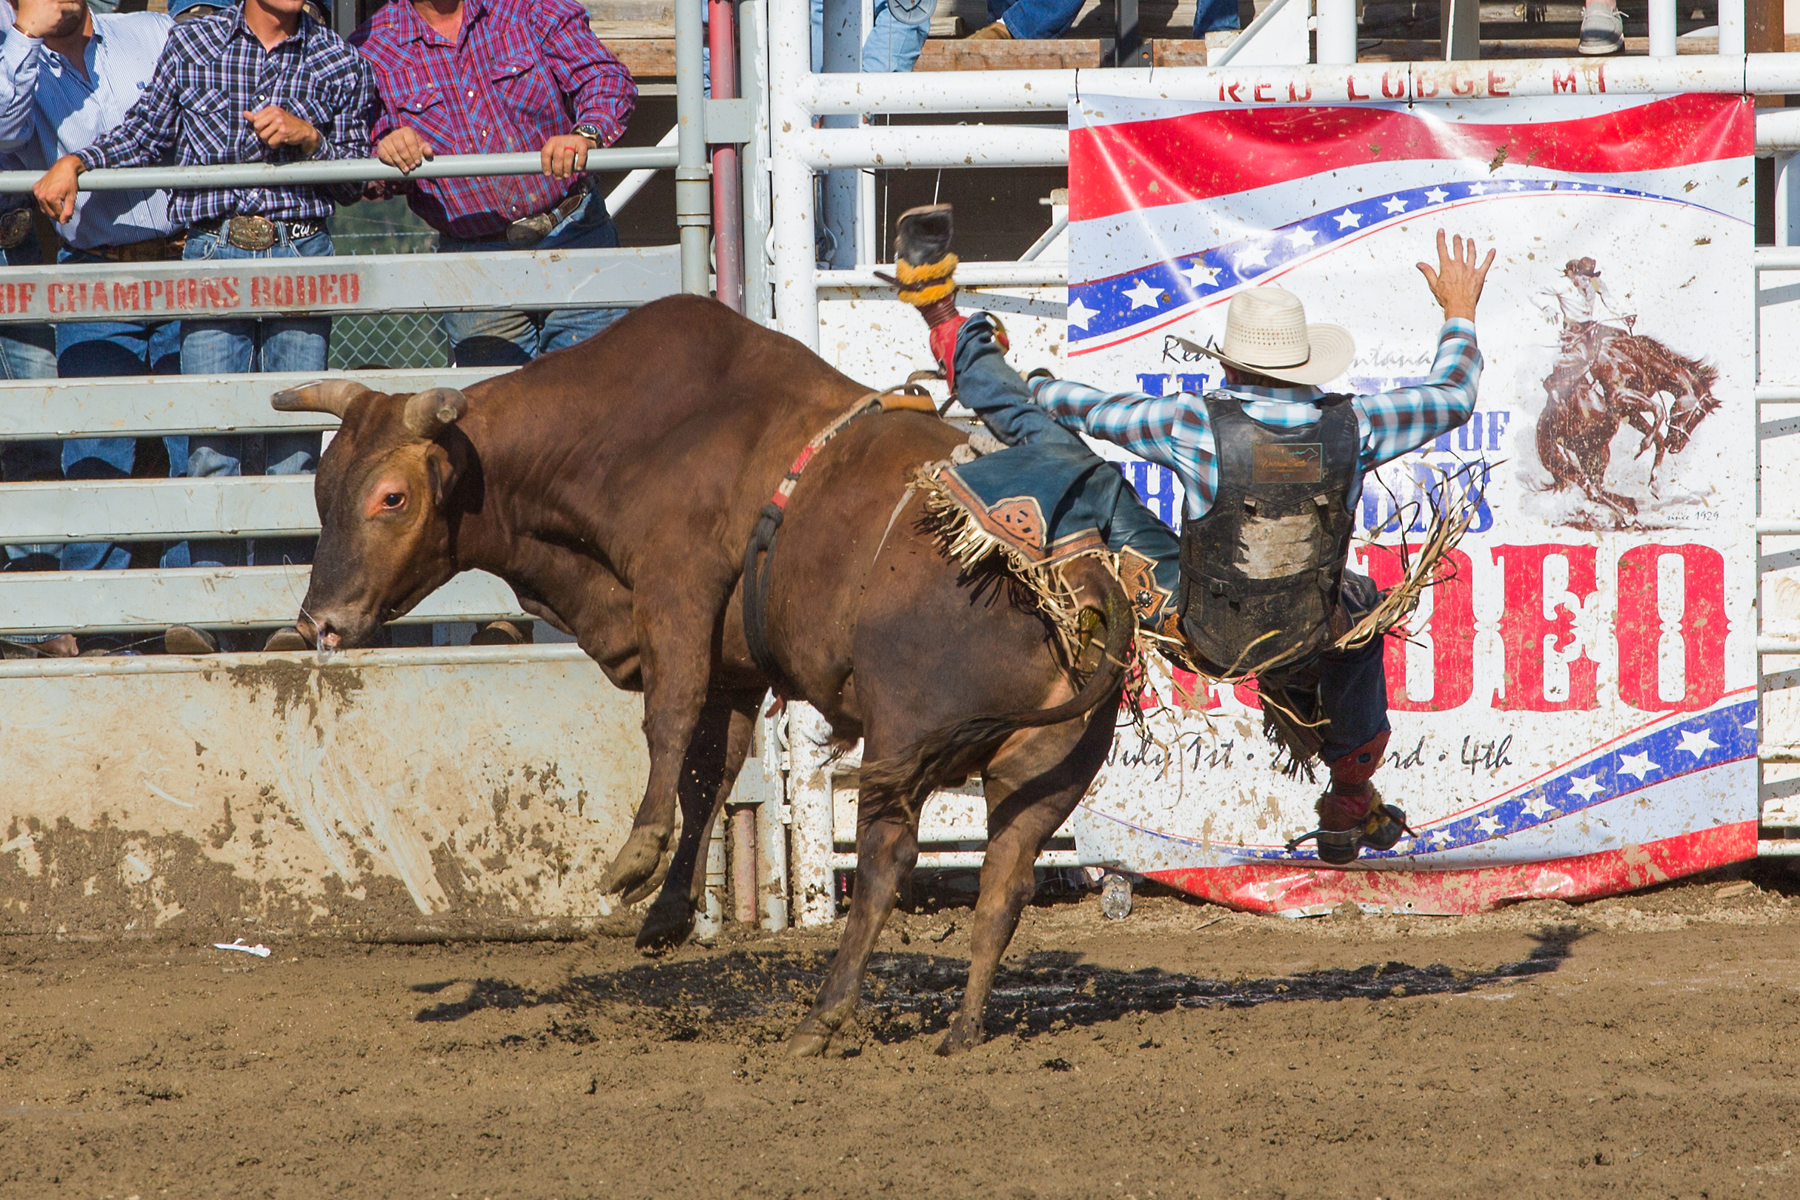 Bull riding at Home of Champions Rodeo, Red Lodge, MT, July 4, 2021.  Click for next photo.